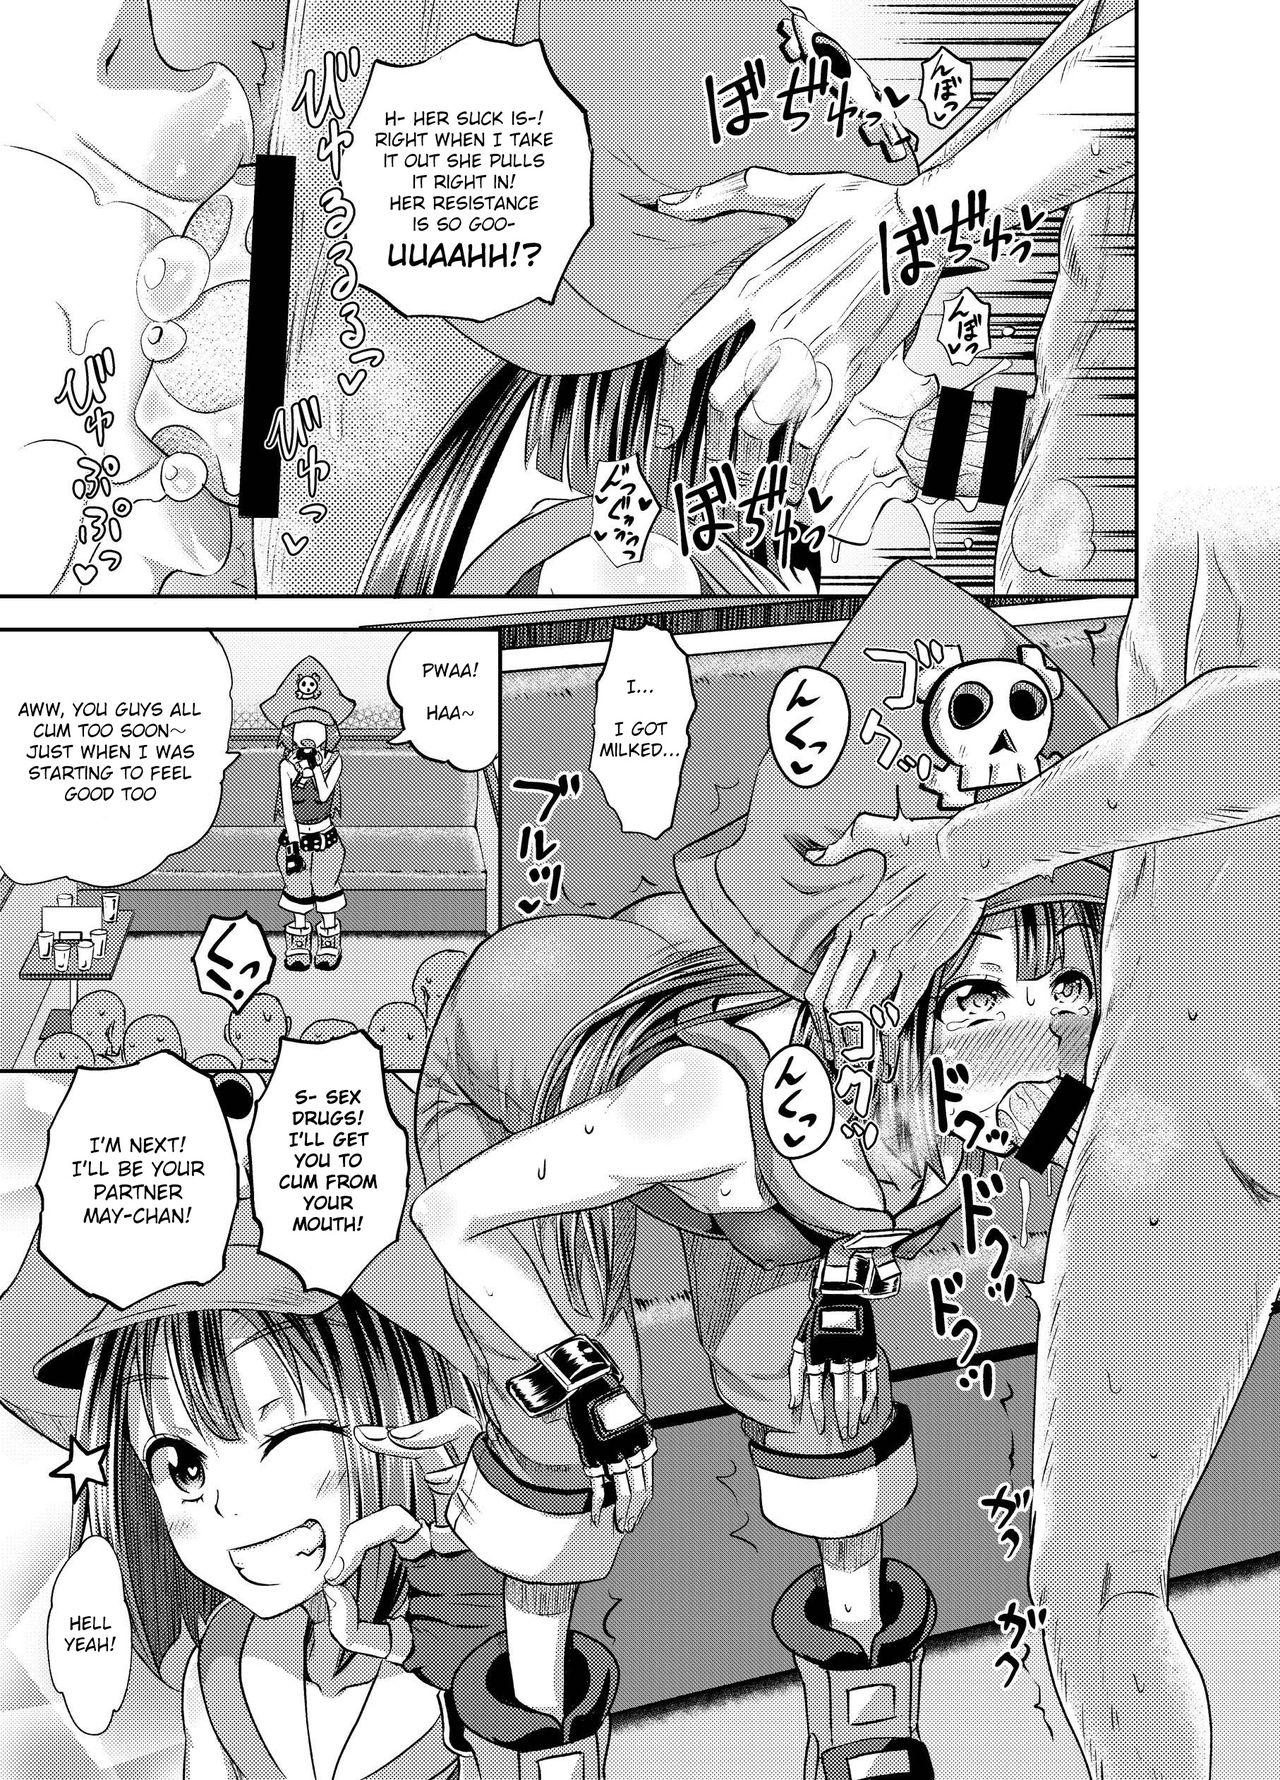 Punk Jellyfish Kaizokudan e Youkoso! | Welcome to The Jellyfish Pleasure Club! - Guilty gear Twink - Page 10